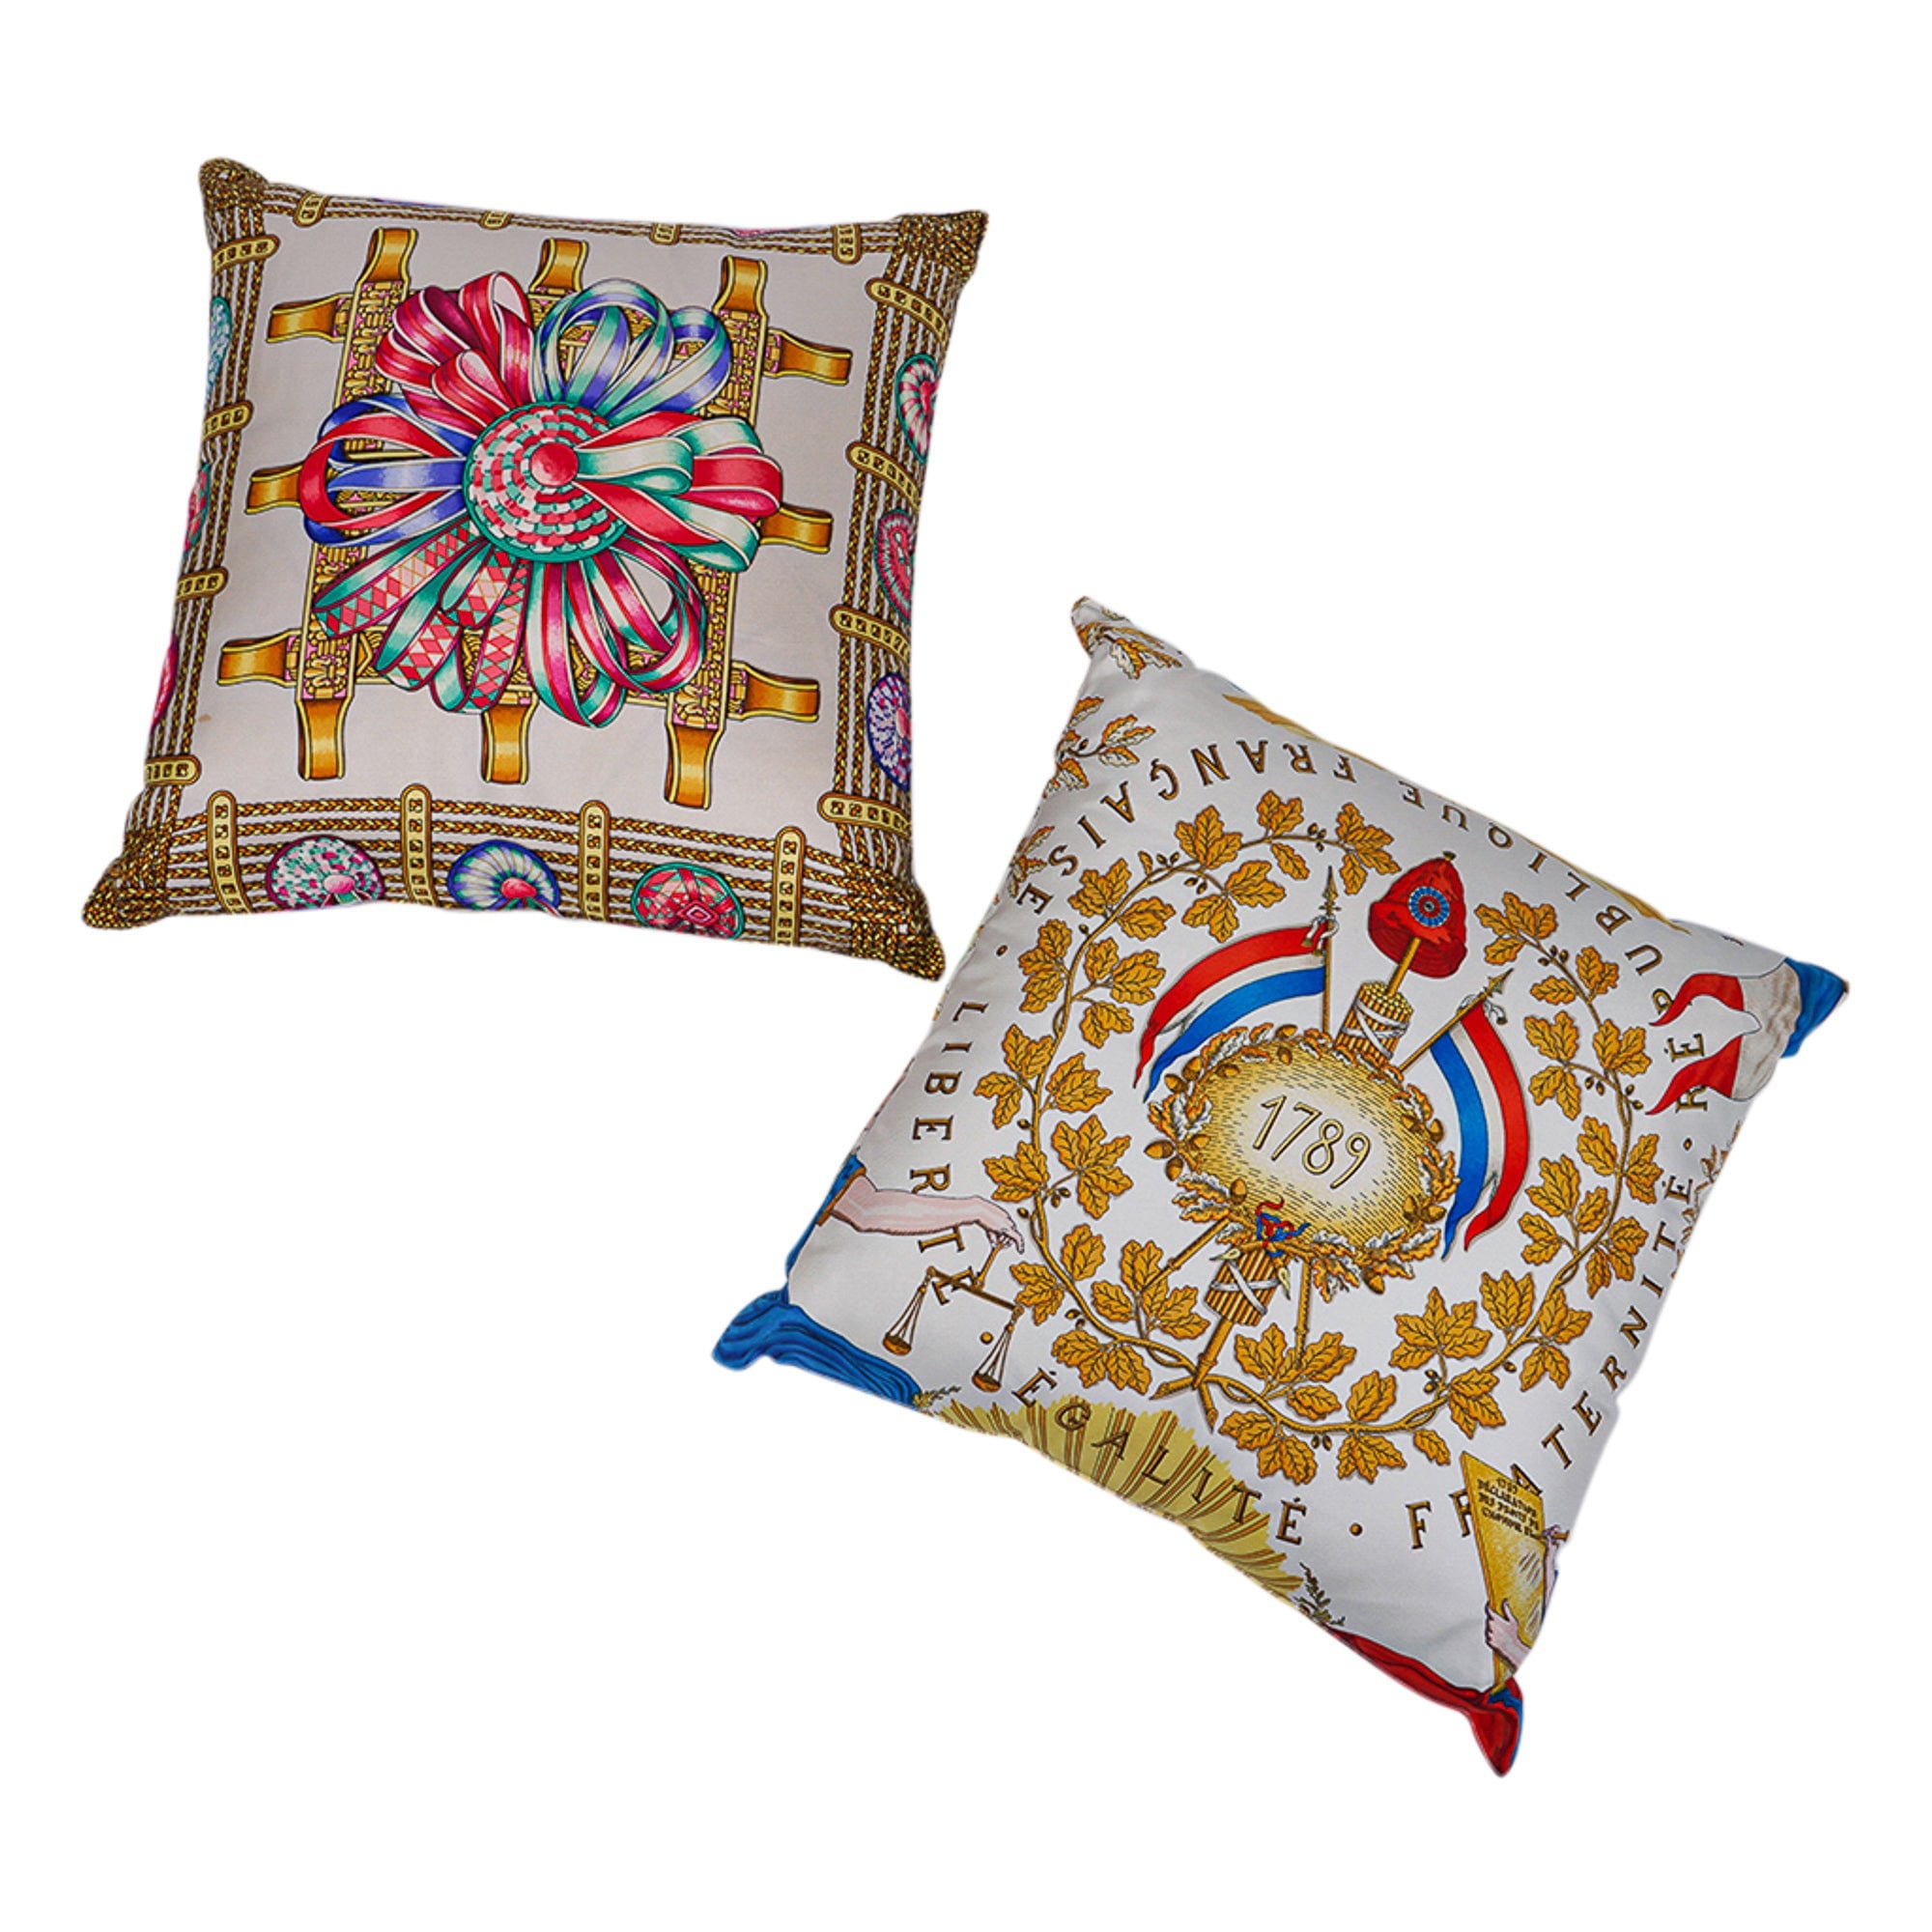 Modern Luxury Home Decor and Accents: Vintage Hermes Silk Scarf Pillows